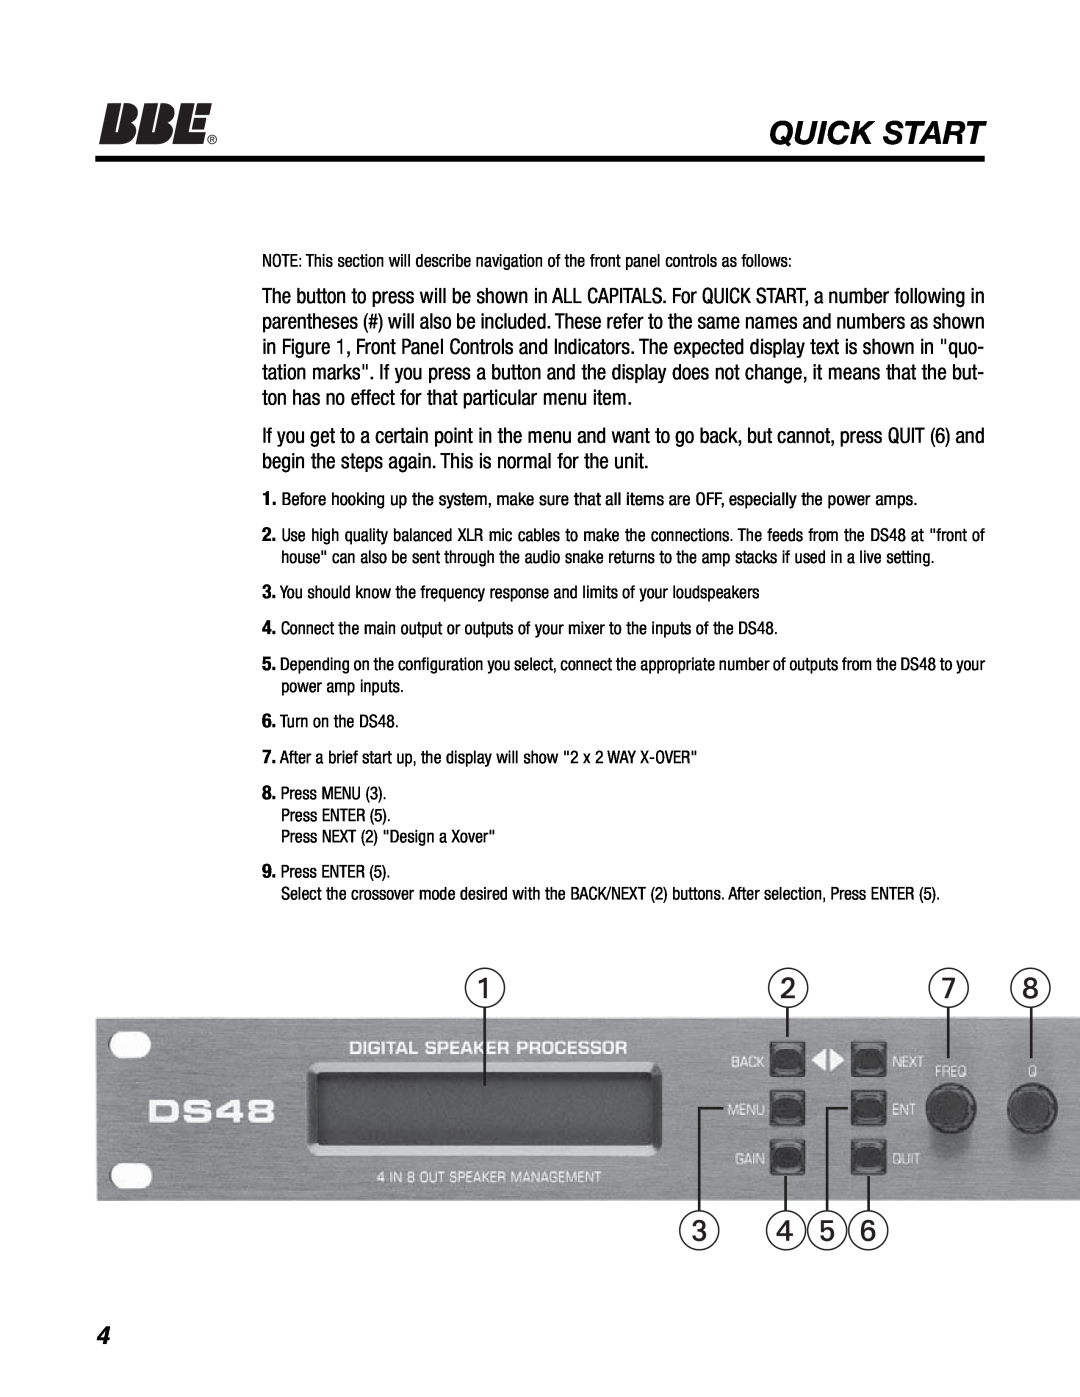 BBE DS48 manual Quick Start 